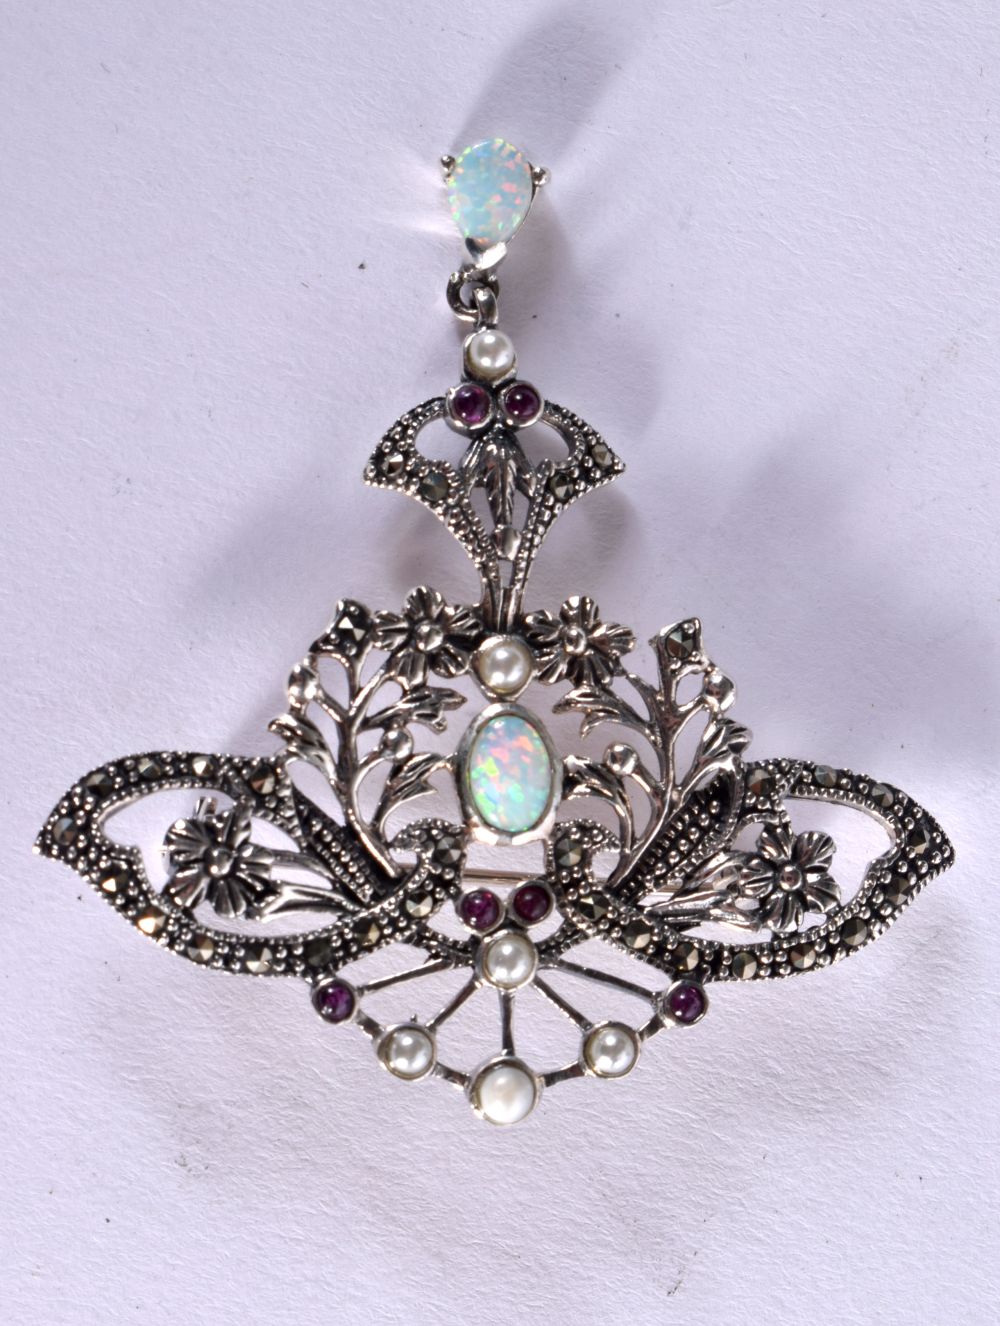 A SILVER BUTTERFLY BROOCH INSET WITH OPALS AND MARCASITE. 5.8cm x 5.5cm, weight 10.4g